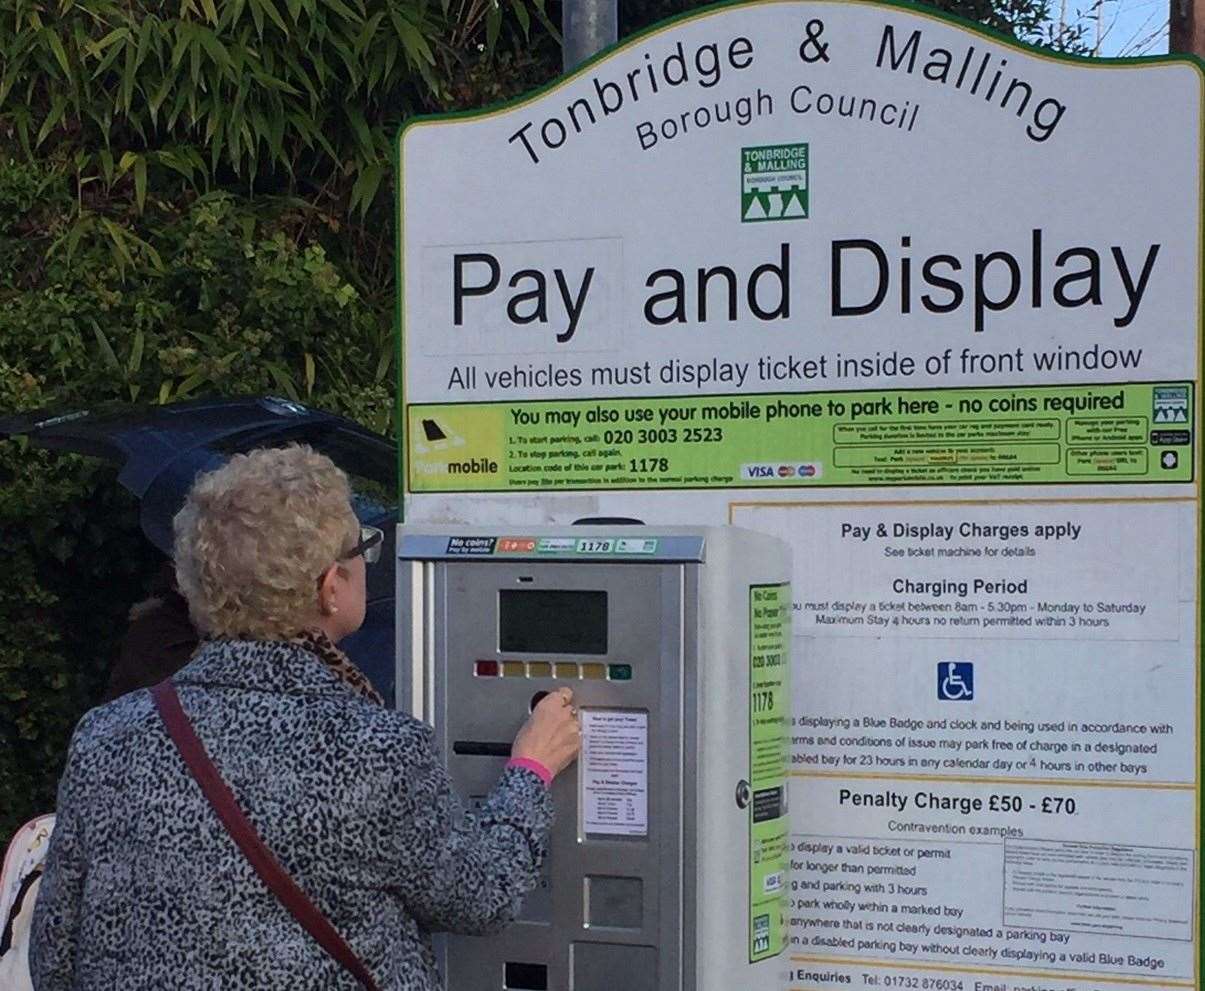 A woman using the pay machine in West Mallling High Street car park